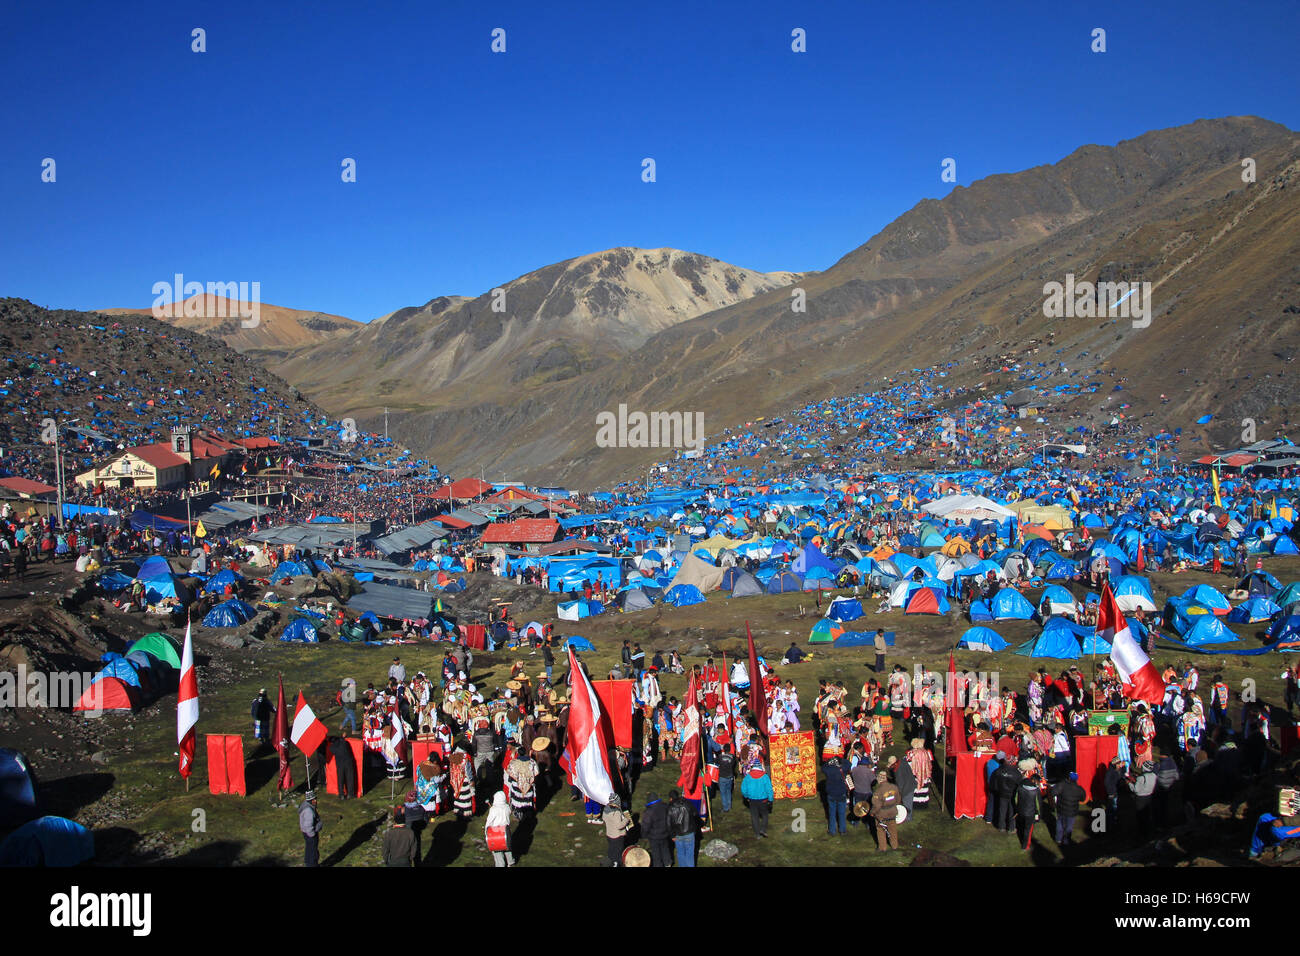 Overview of Quyllurit'i inca festival in the peruvian andes near ausangate mountain. Stock Photo